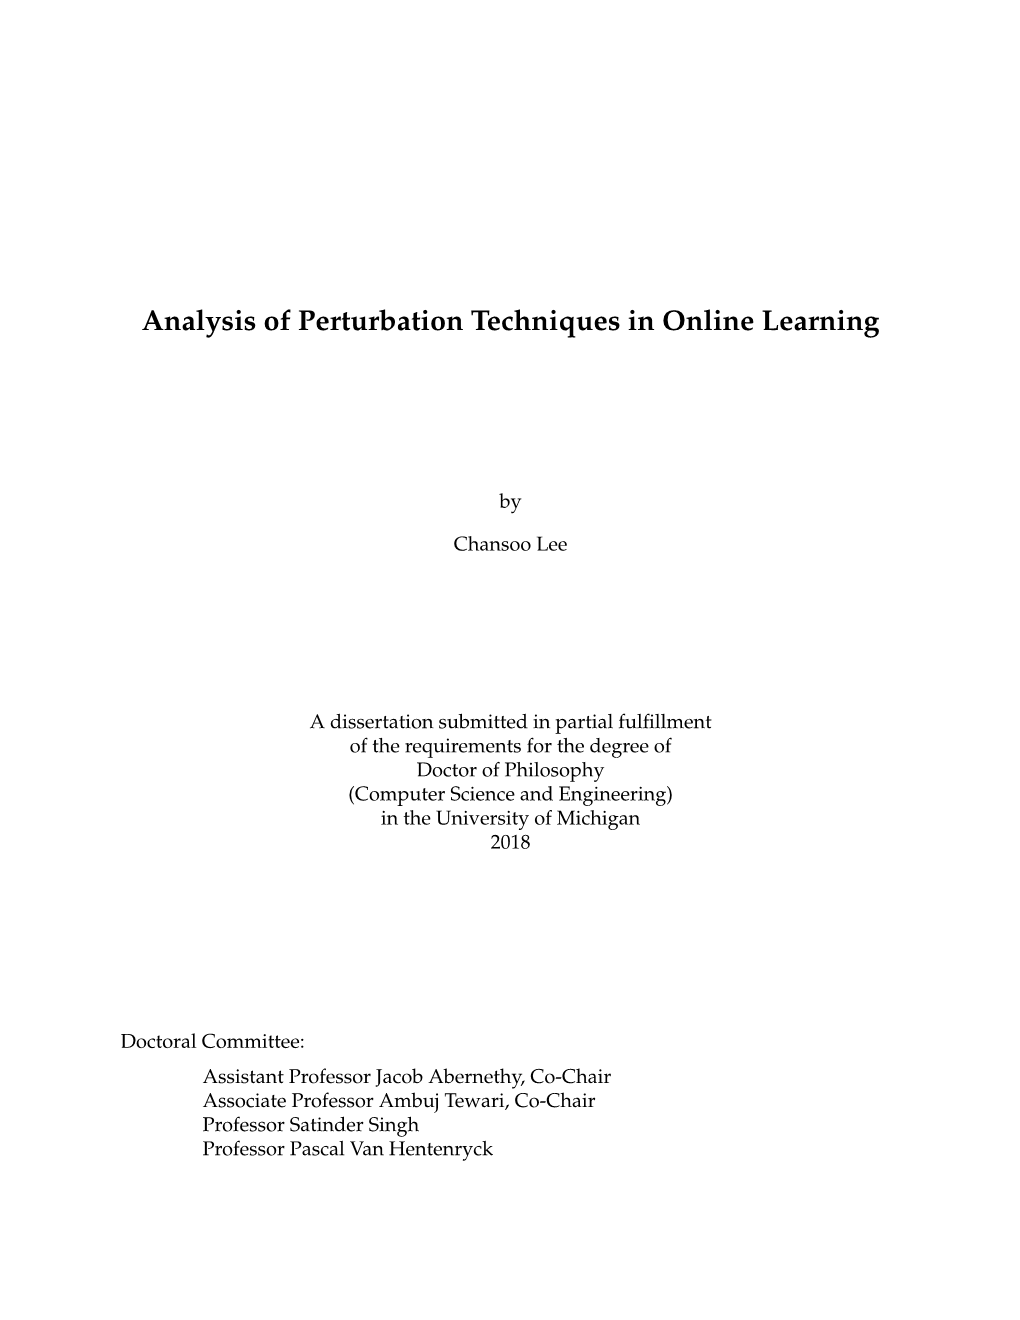 Analysis of Perturbation Techniques in Online Learning